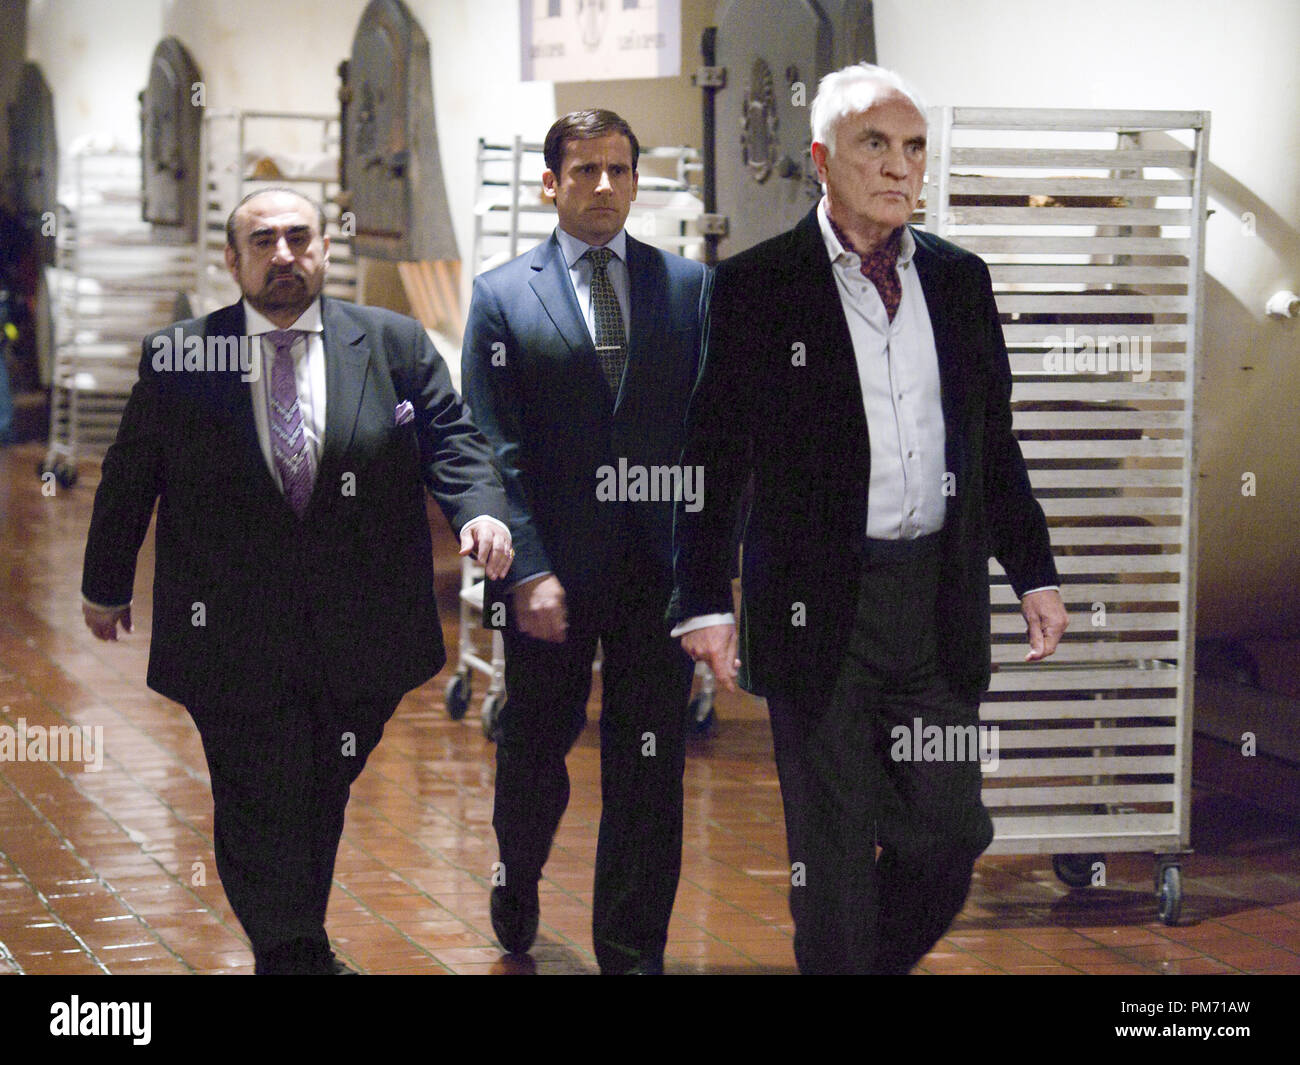 Film Still from 'Get Smart' Ken Davitian, Steve Carell, Terence Stamp © 2008 Warner Brothers Photo credit: Tracy Bennett   File Reference # 307551190THA  For Editorial Use Only -  All Rights Reserved Stock Photo